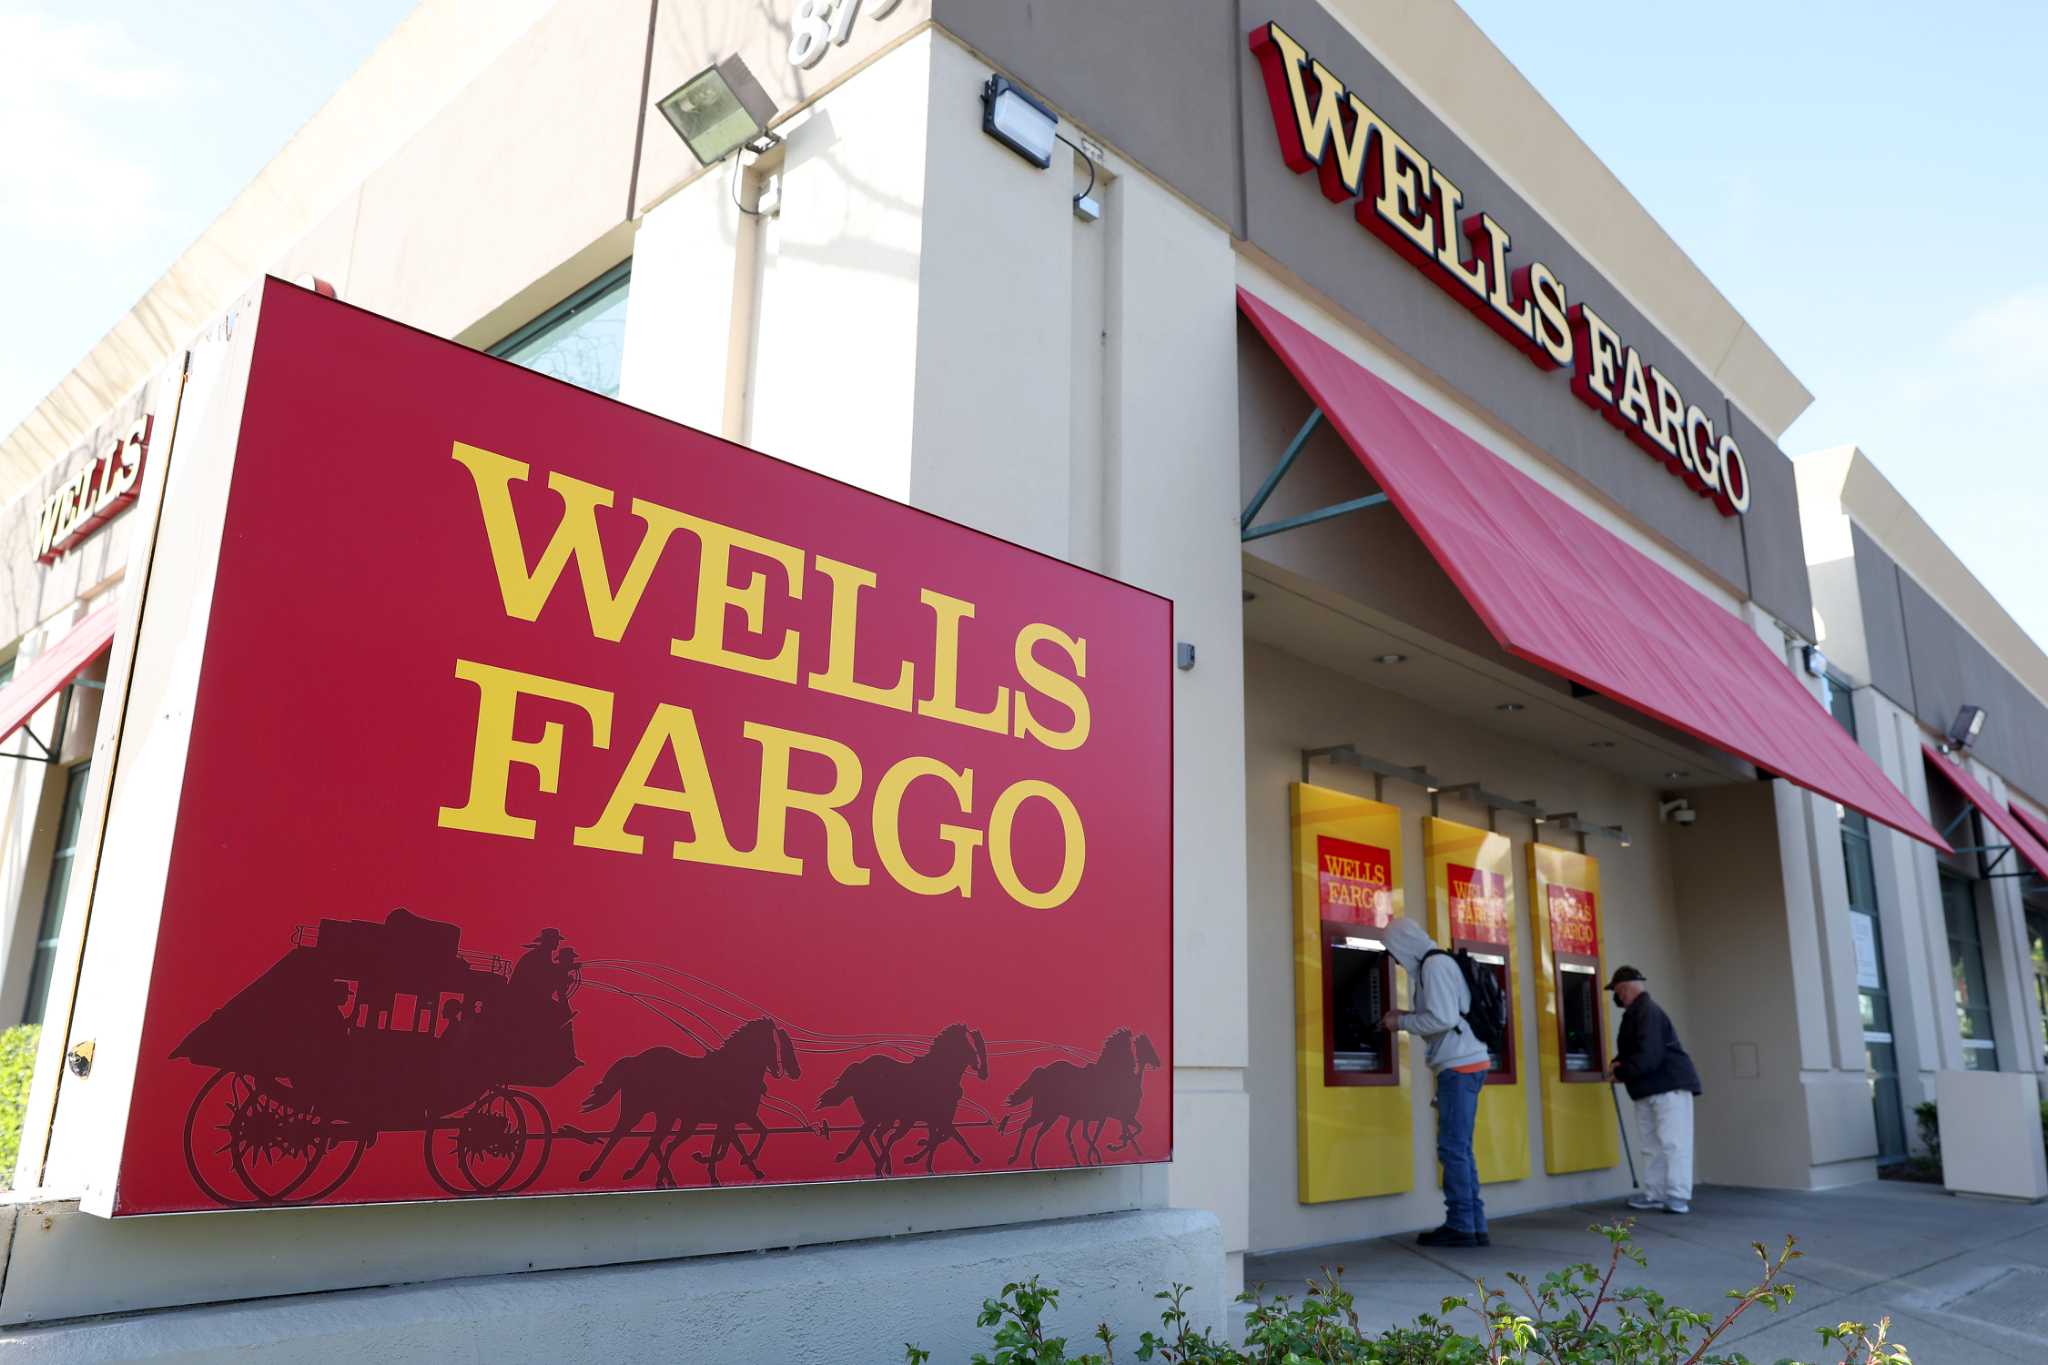 San Antonio council split on whether to do business with Wells Fargo